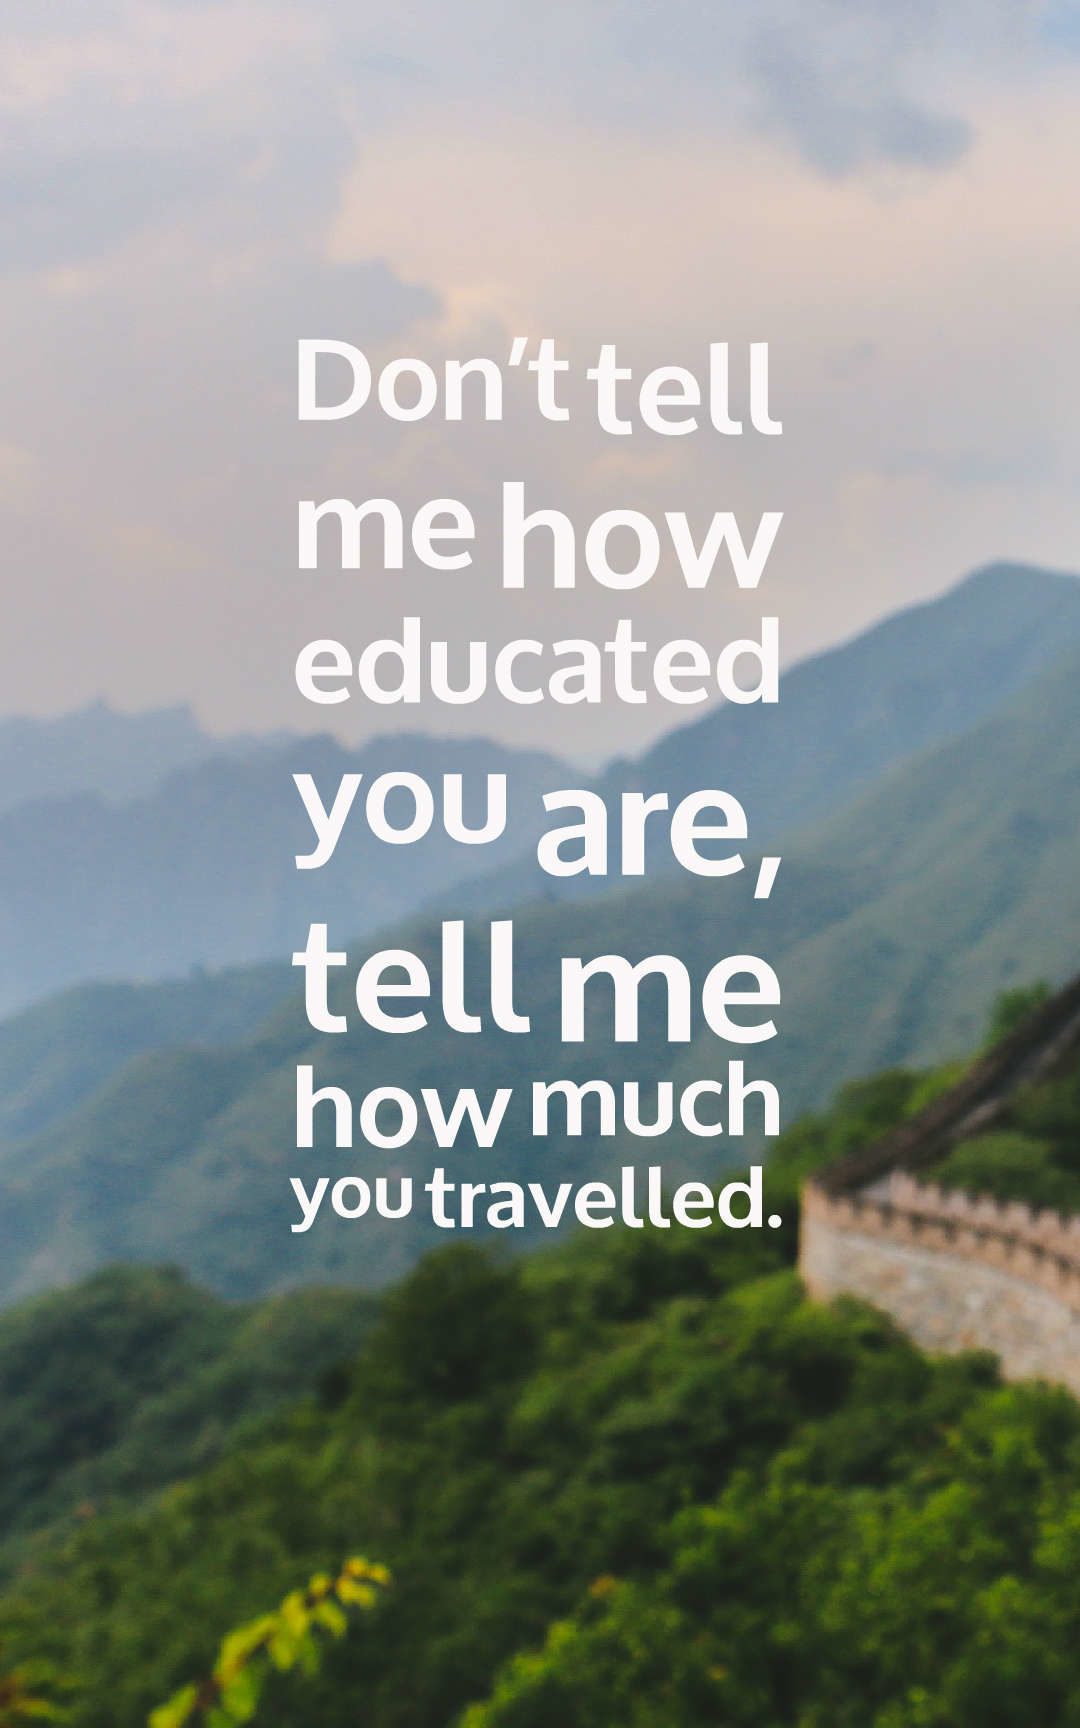 72 Inspirational Travel Quotes - Short Travel Quotes With ...